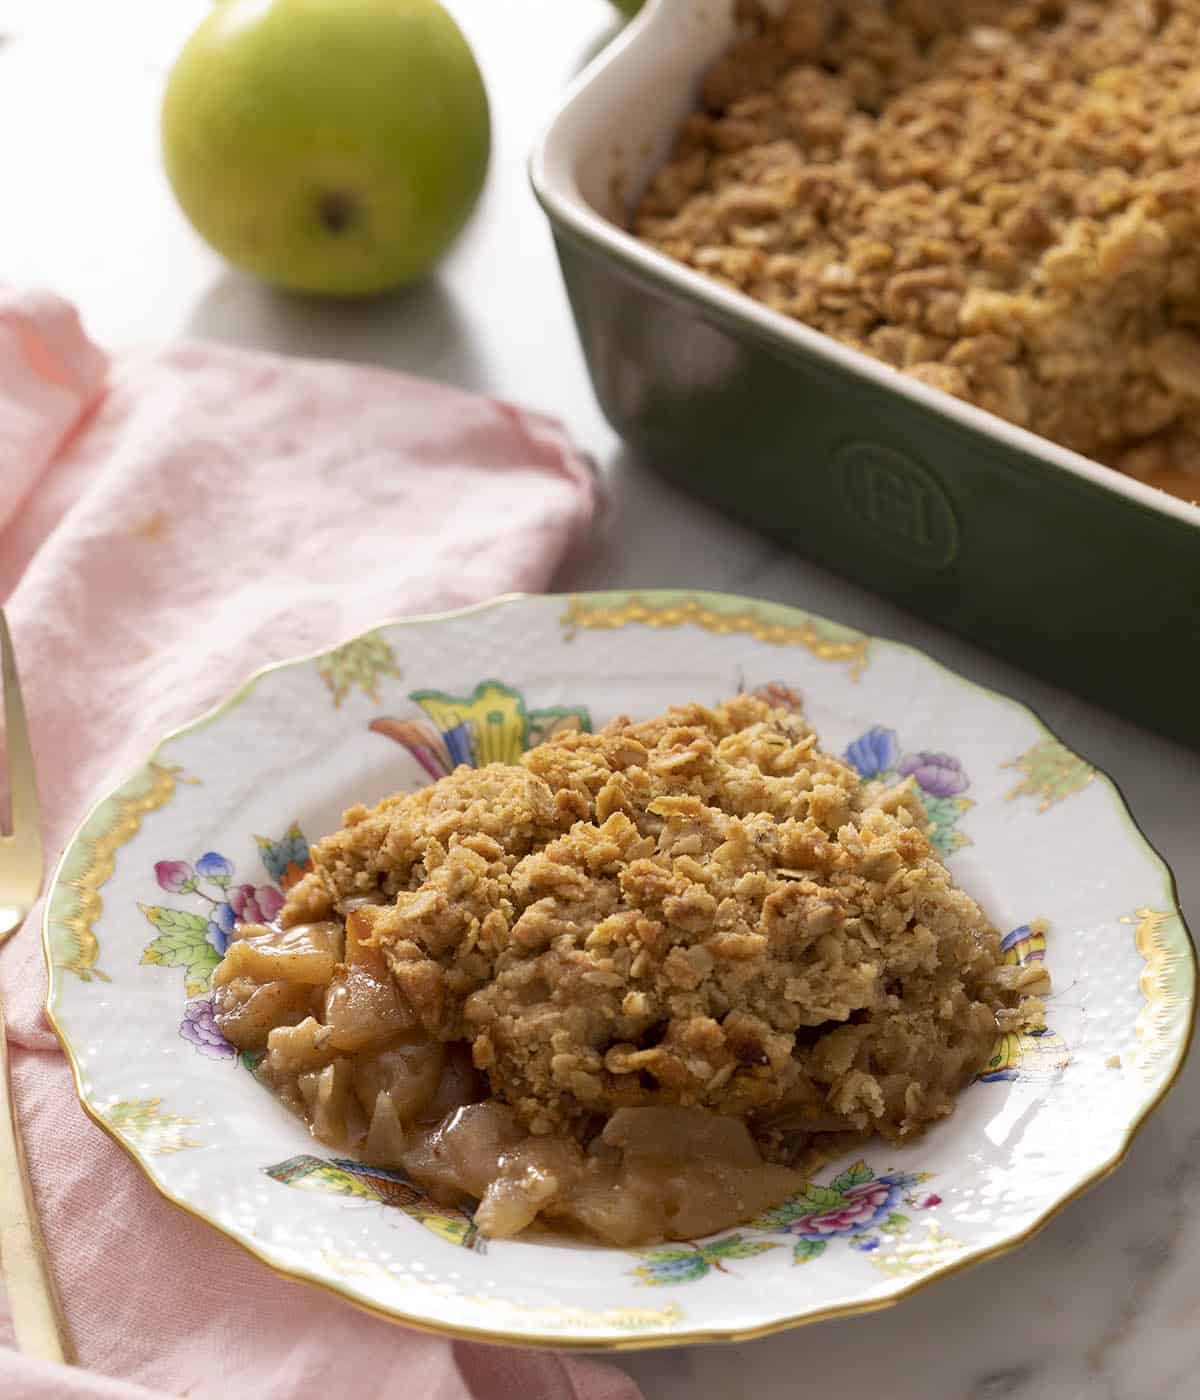 Apple crisp on a plate ready to eat. A baking dish with more apple crisp in the background.